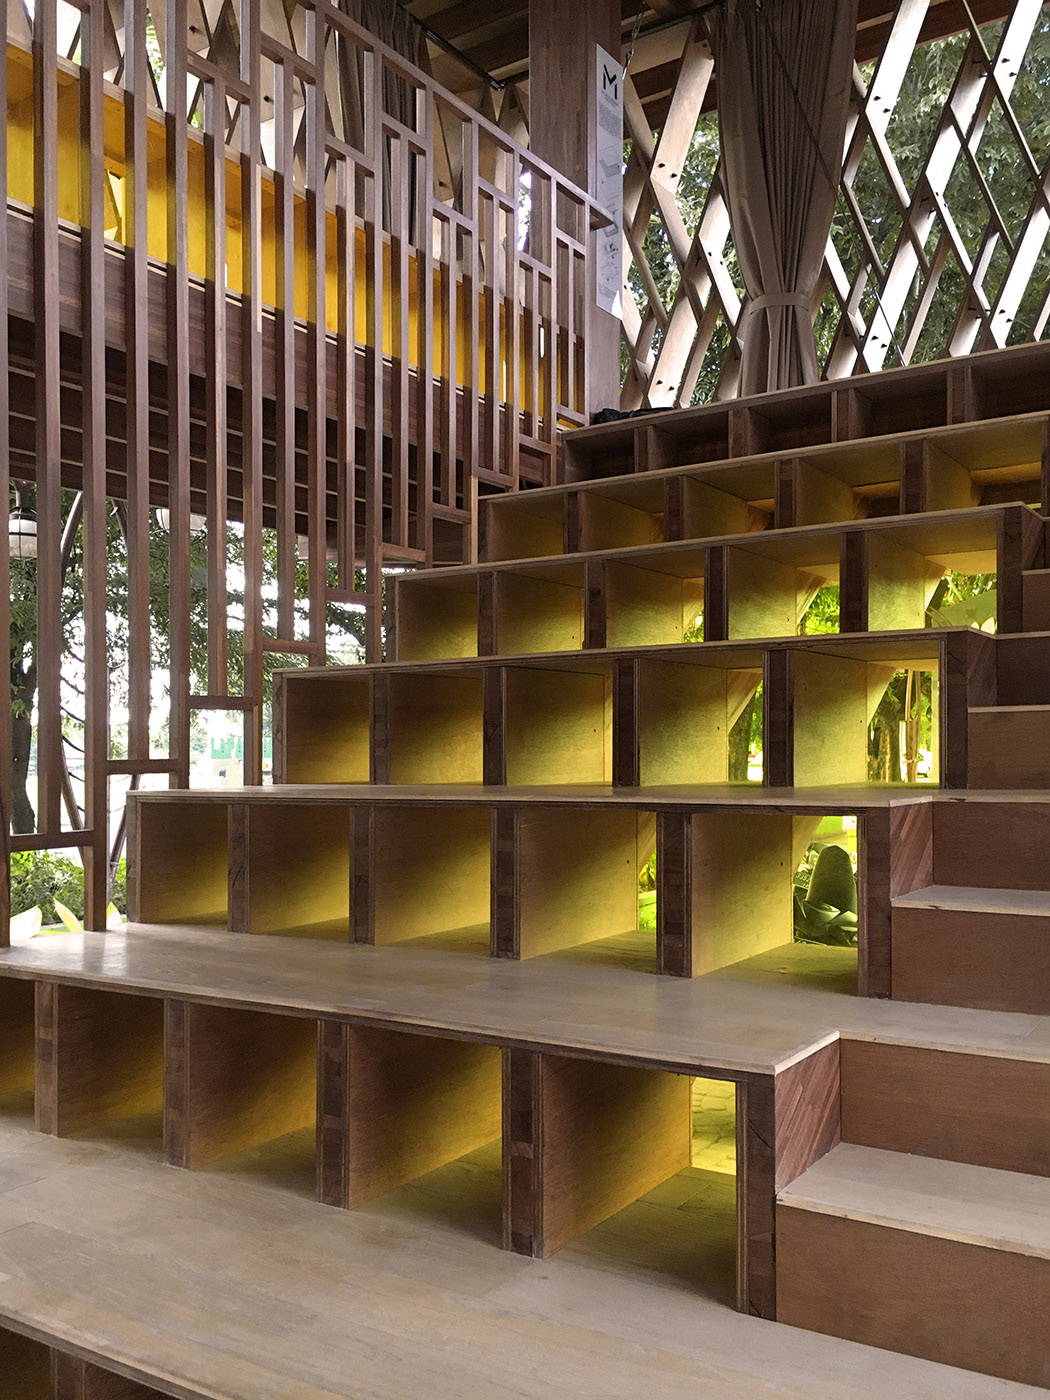 Increasing interest in reading? Microlibrary, multifunctional and sustainable community spaces